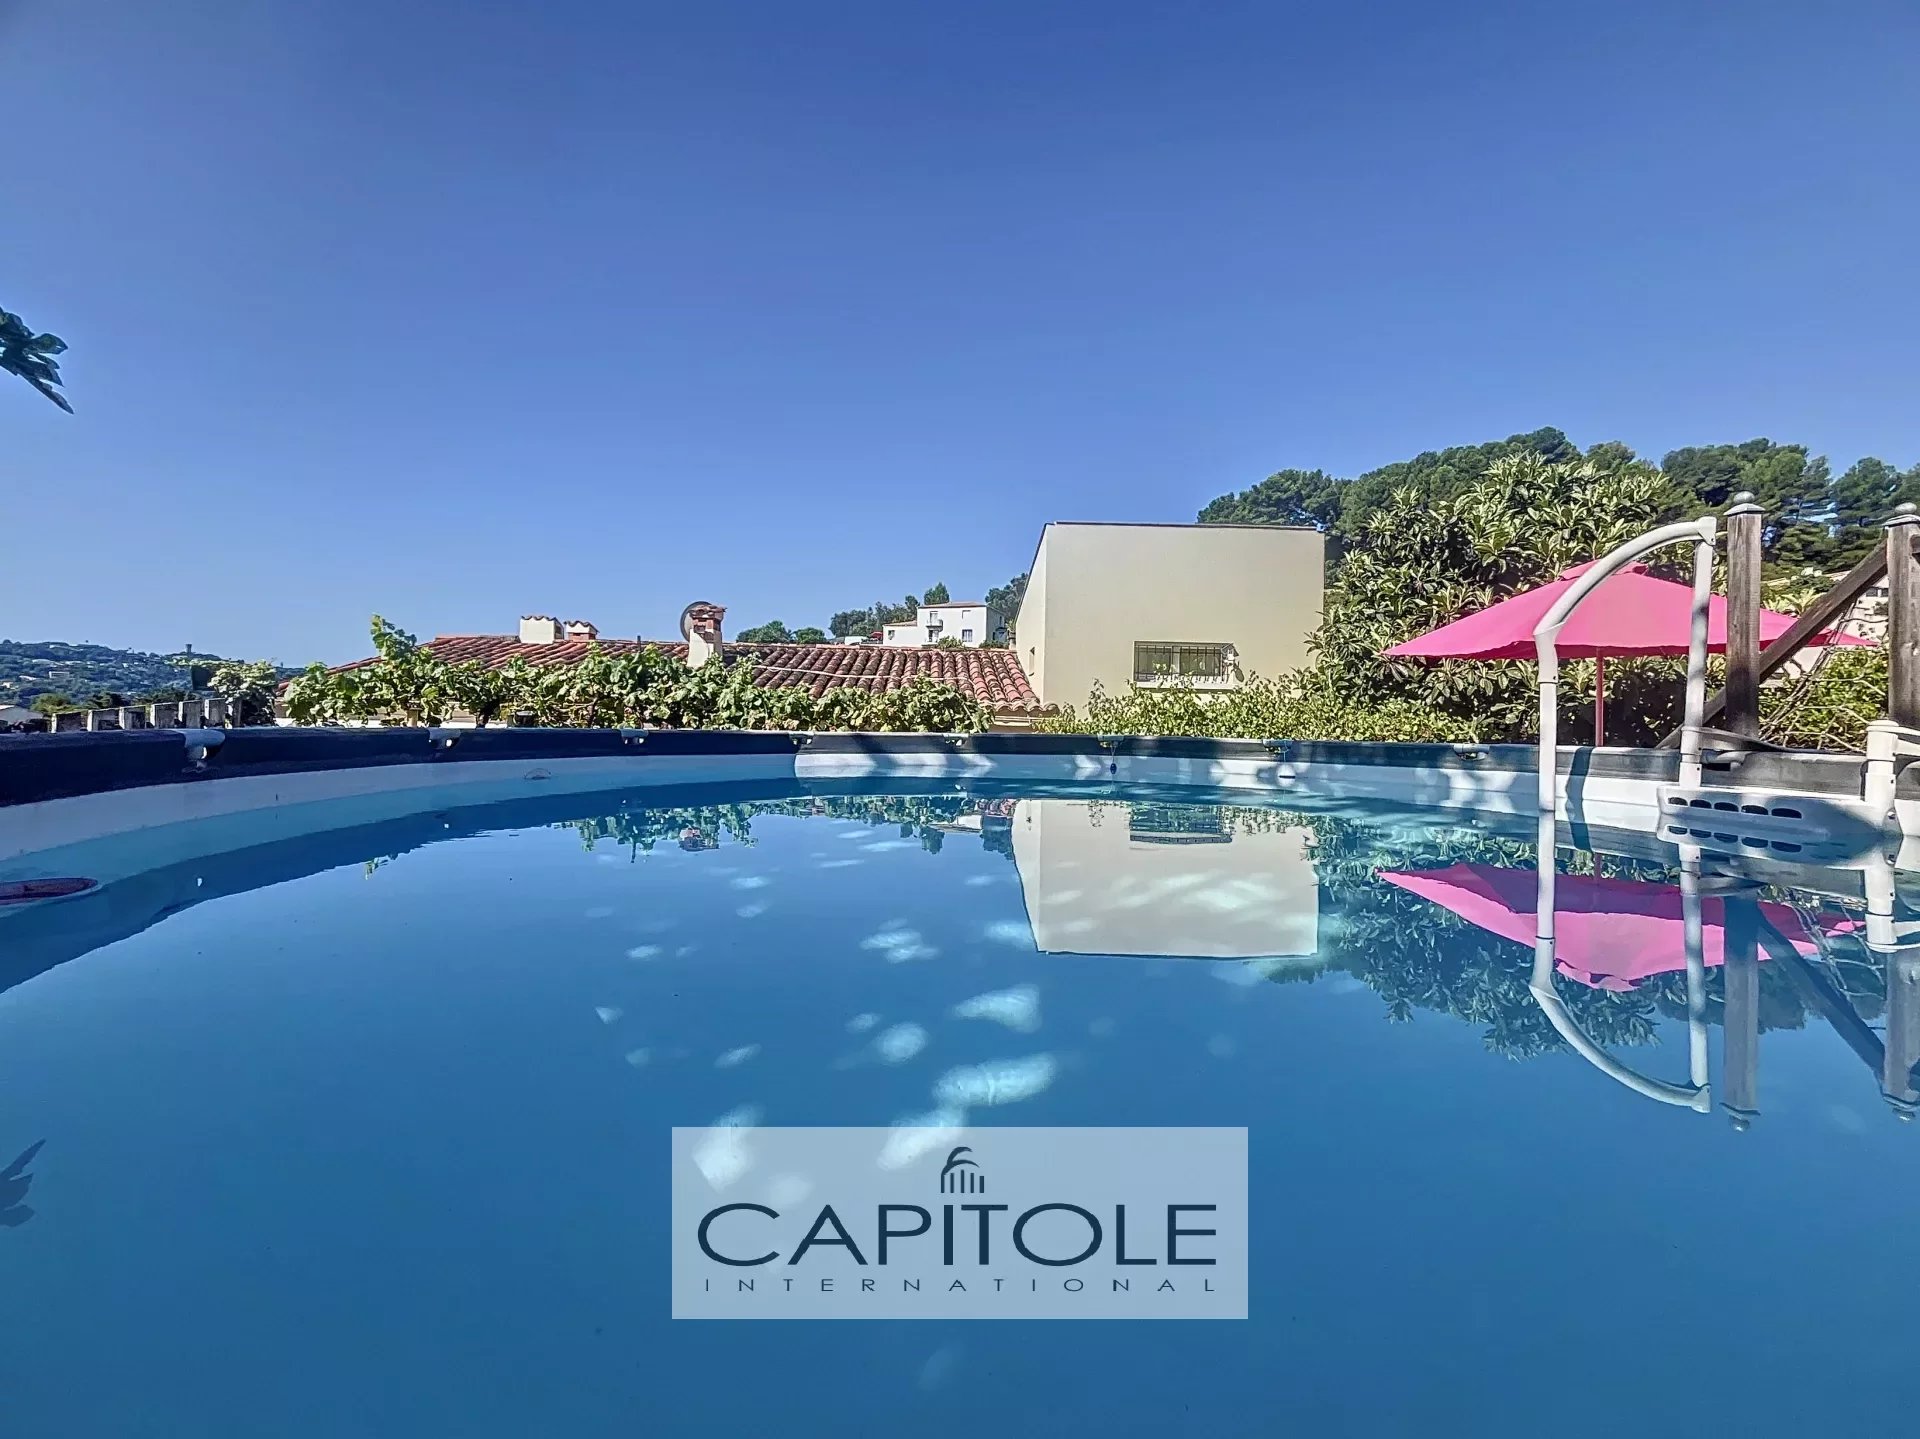 VALLAURIS - 8-room detached villa with swimming pool, 2 terraces and garden